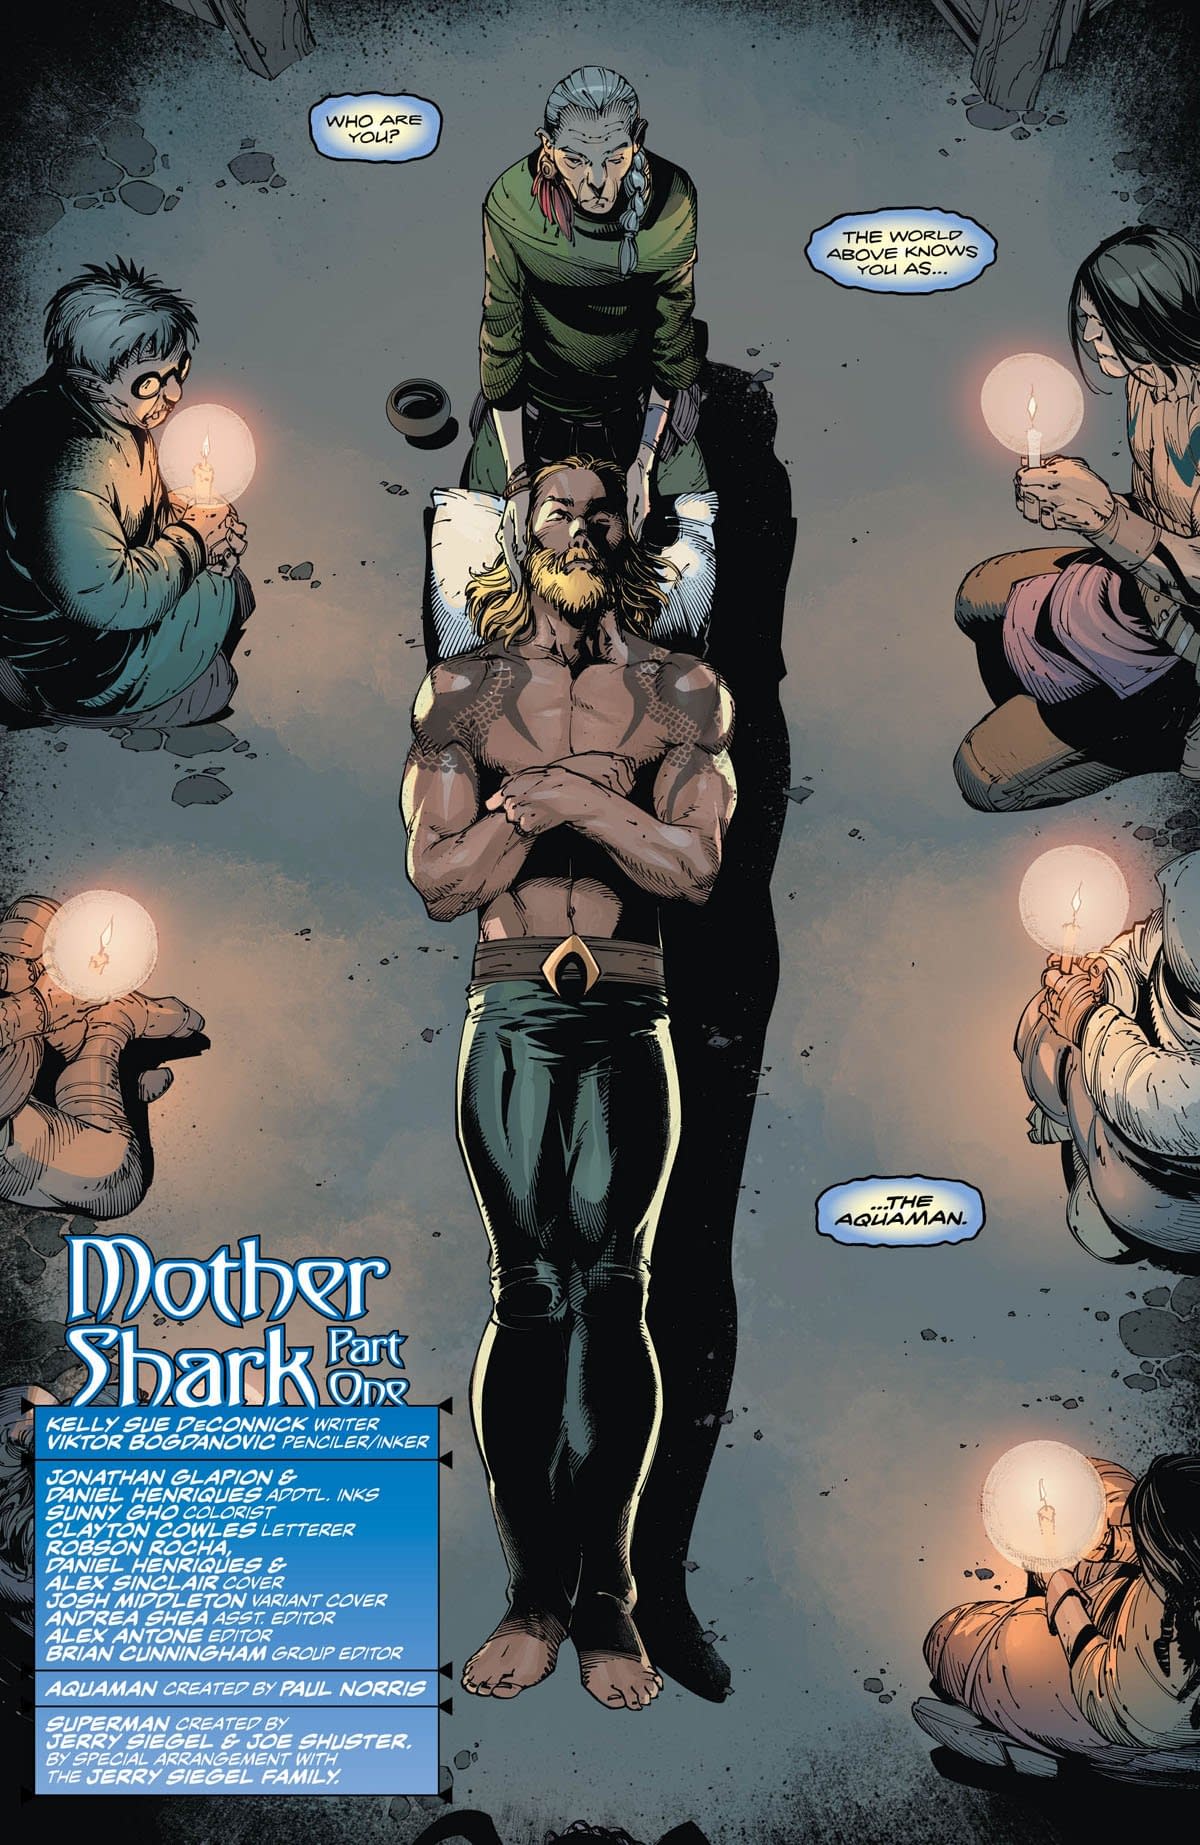 Aquaman Gets Zooted in Tomorrow's Aquaman #48 (Preview)